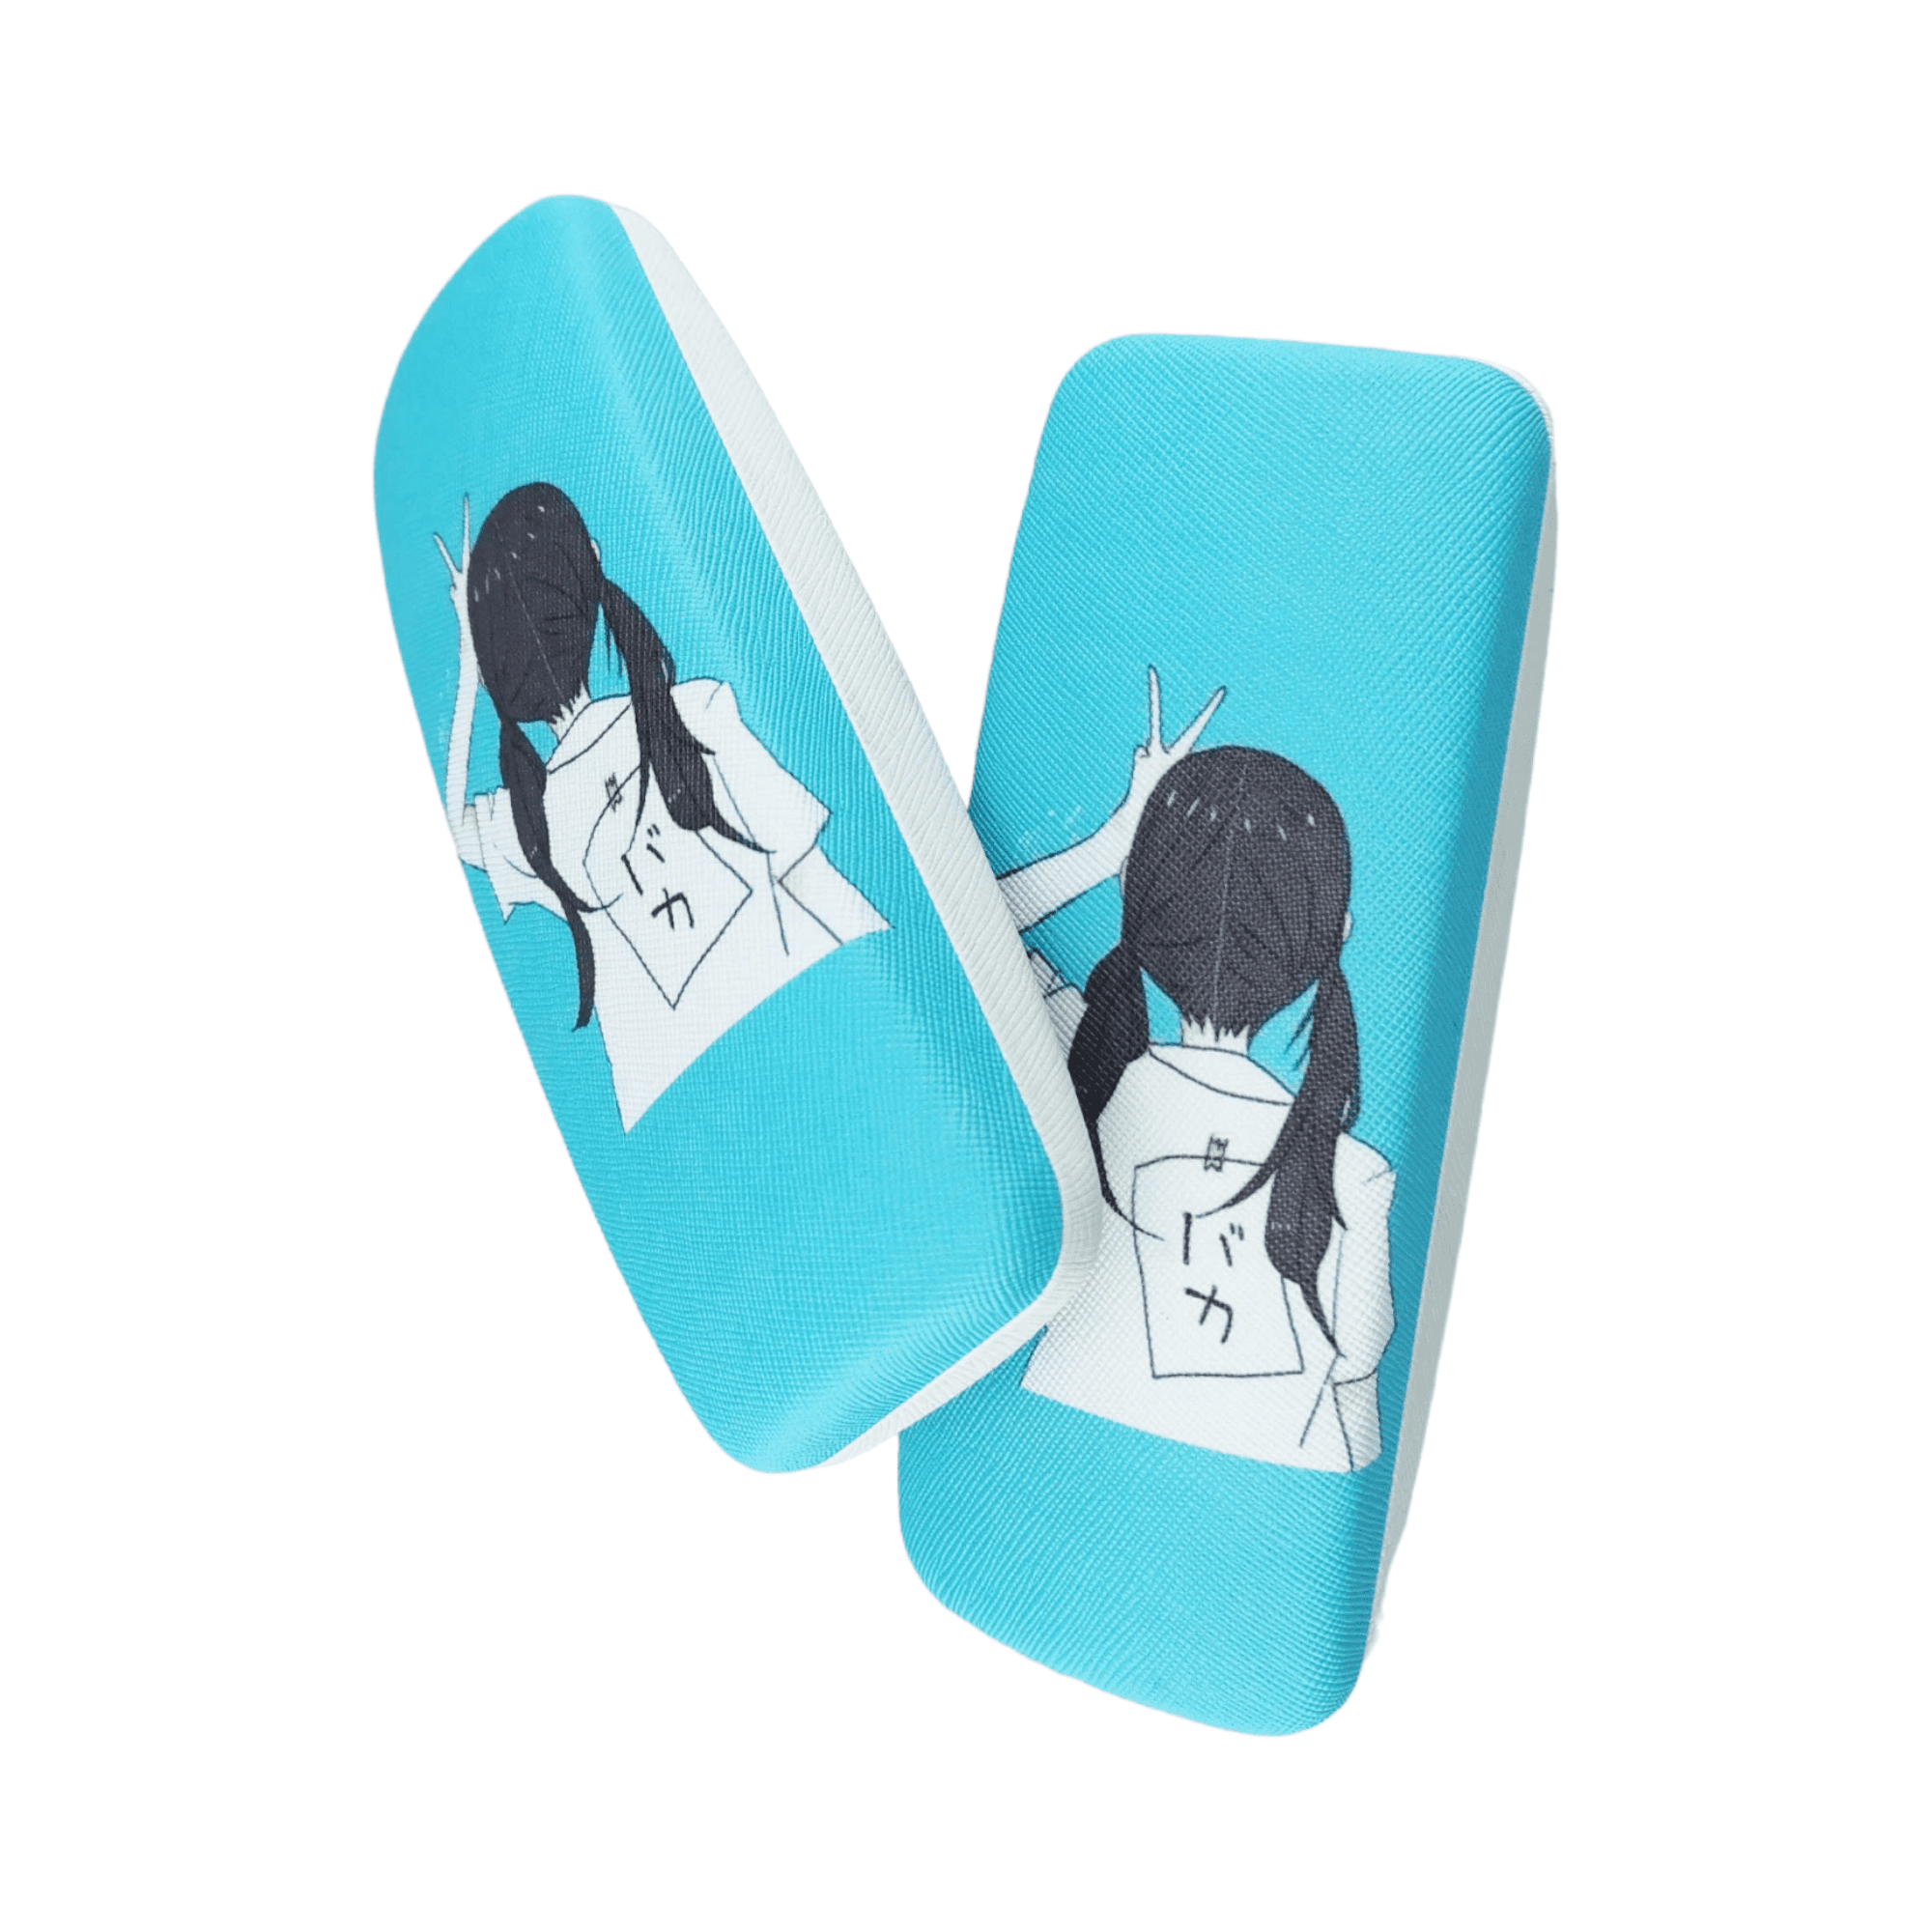 Girl Illustration Hard shell Glasses Cases Wholesale,Girl Illustration Hard shell Glasses Cases Wholesale, a girl's back, blue background, glasses accessories, care vision, Japanese style, China glasses case distributor, 2 eyeglass cases stacked